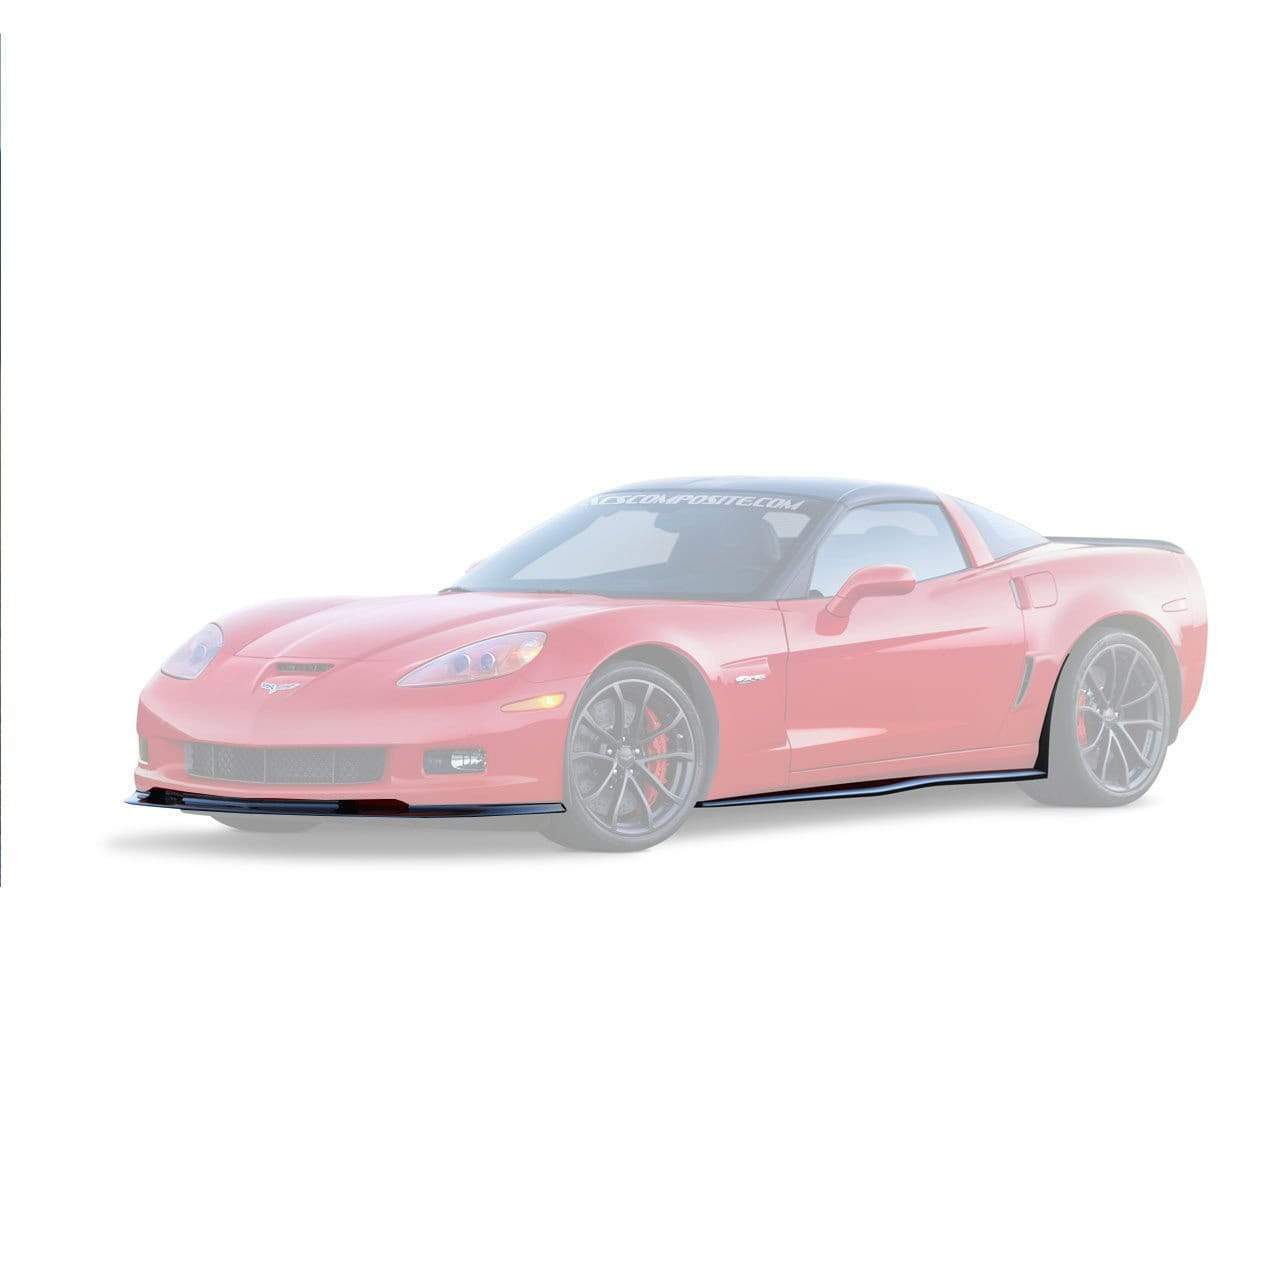 ACS Composite C6 Z06 Grand Sport Aeropack in Primer with Zero6 Rockers [27-4-018|27-4-023|27-4-027]SBK. Improve airflow, downforce, and enhance your Corvette's aggressive stance.